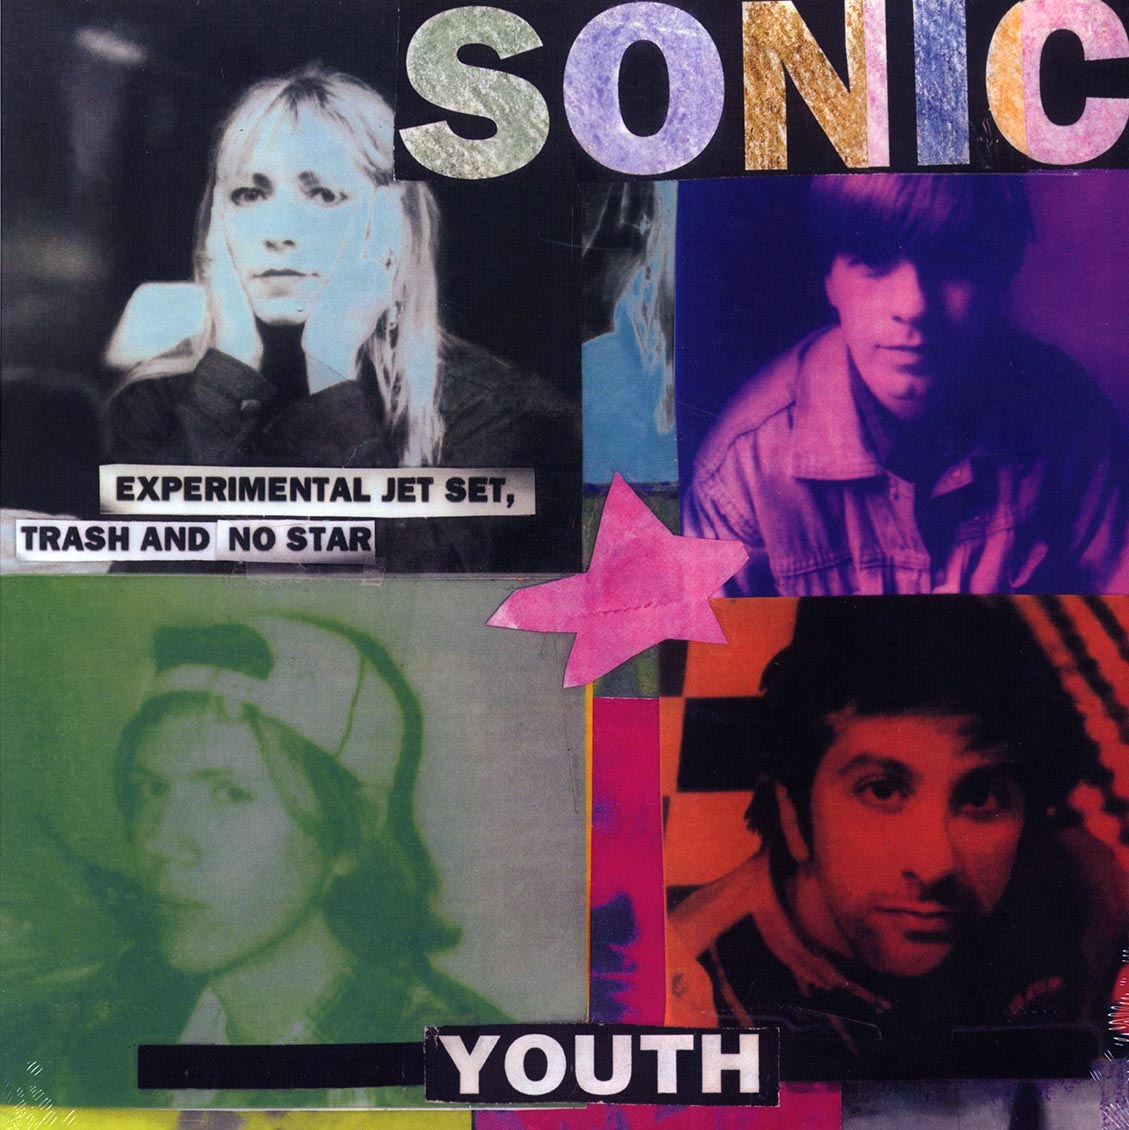 Sonic Youth - Experimental Jet Set, Trash And No Star (incl. mp3) (180g) (remastered) - Vinyl LP